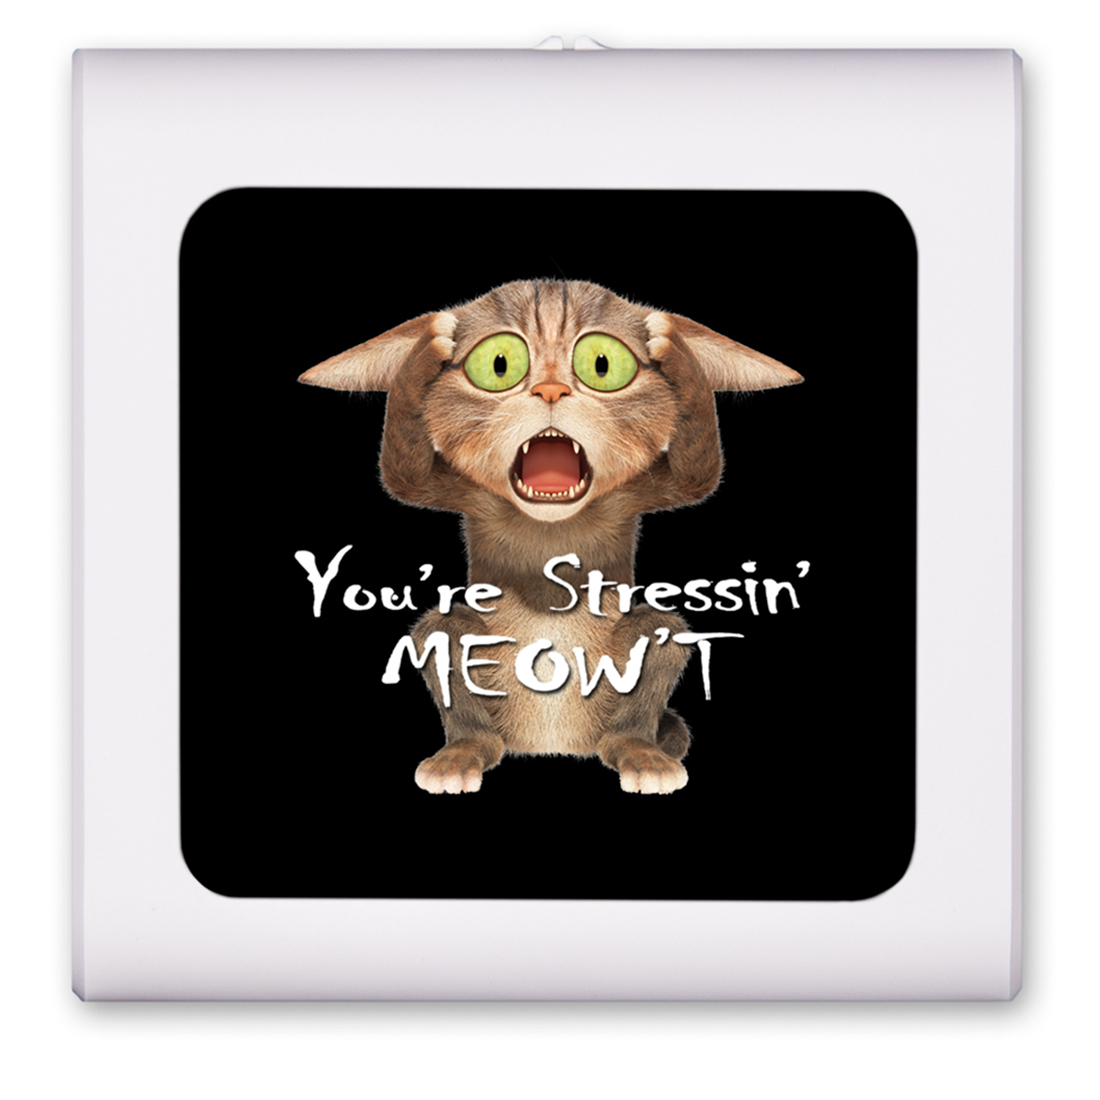 You're Stressin' Meow't - #8202